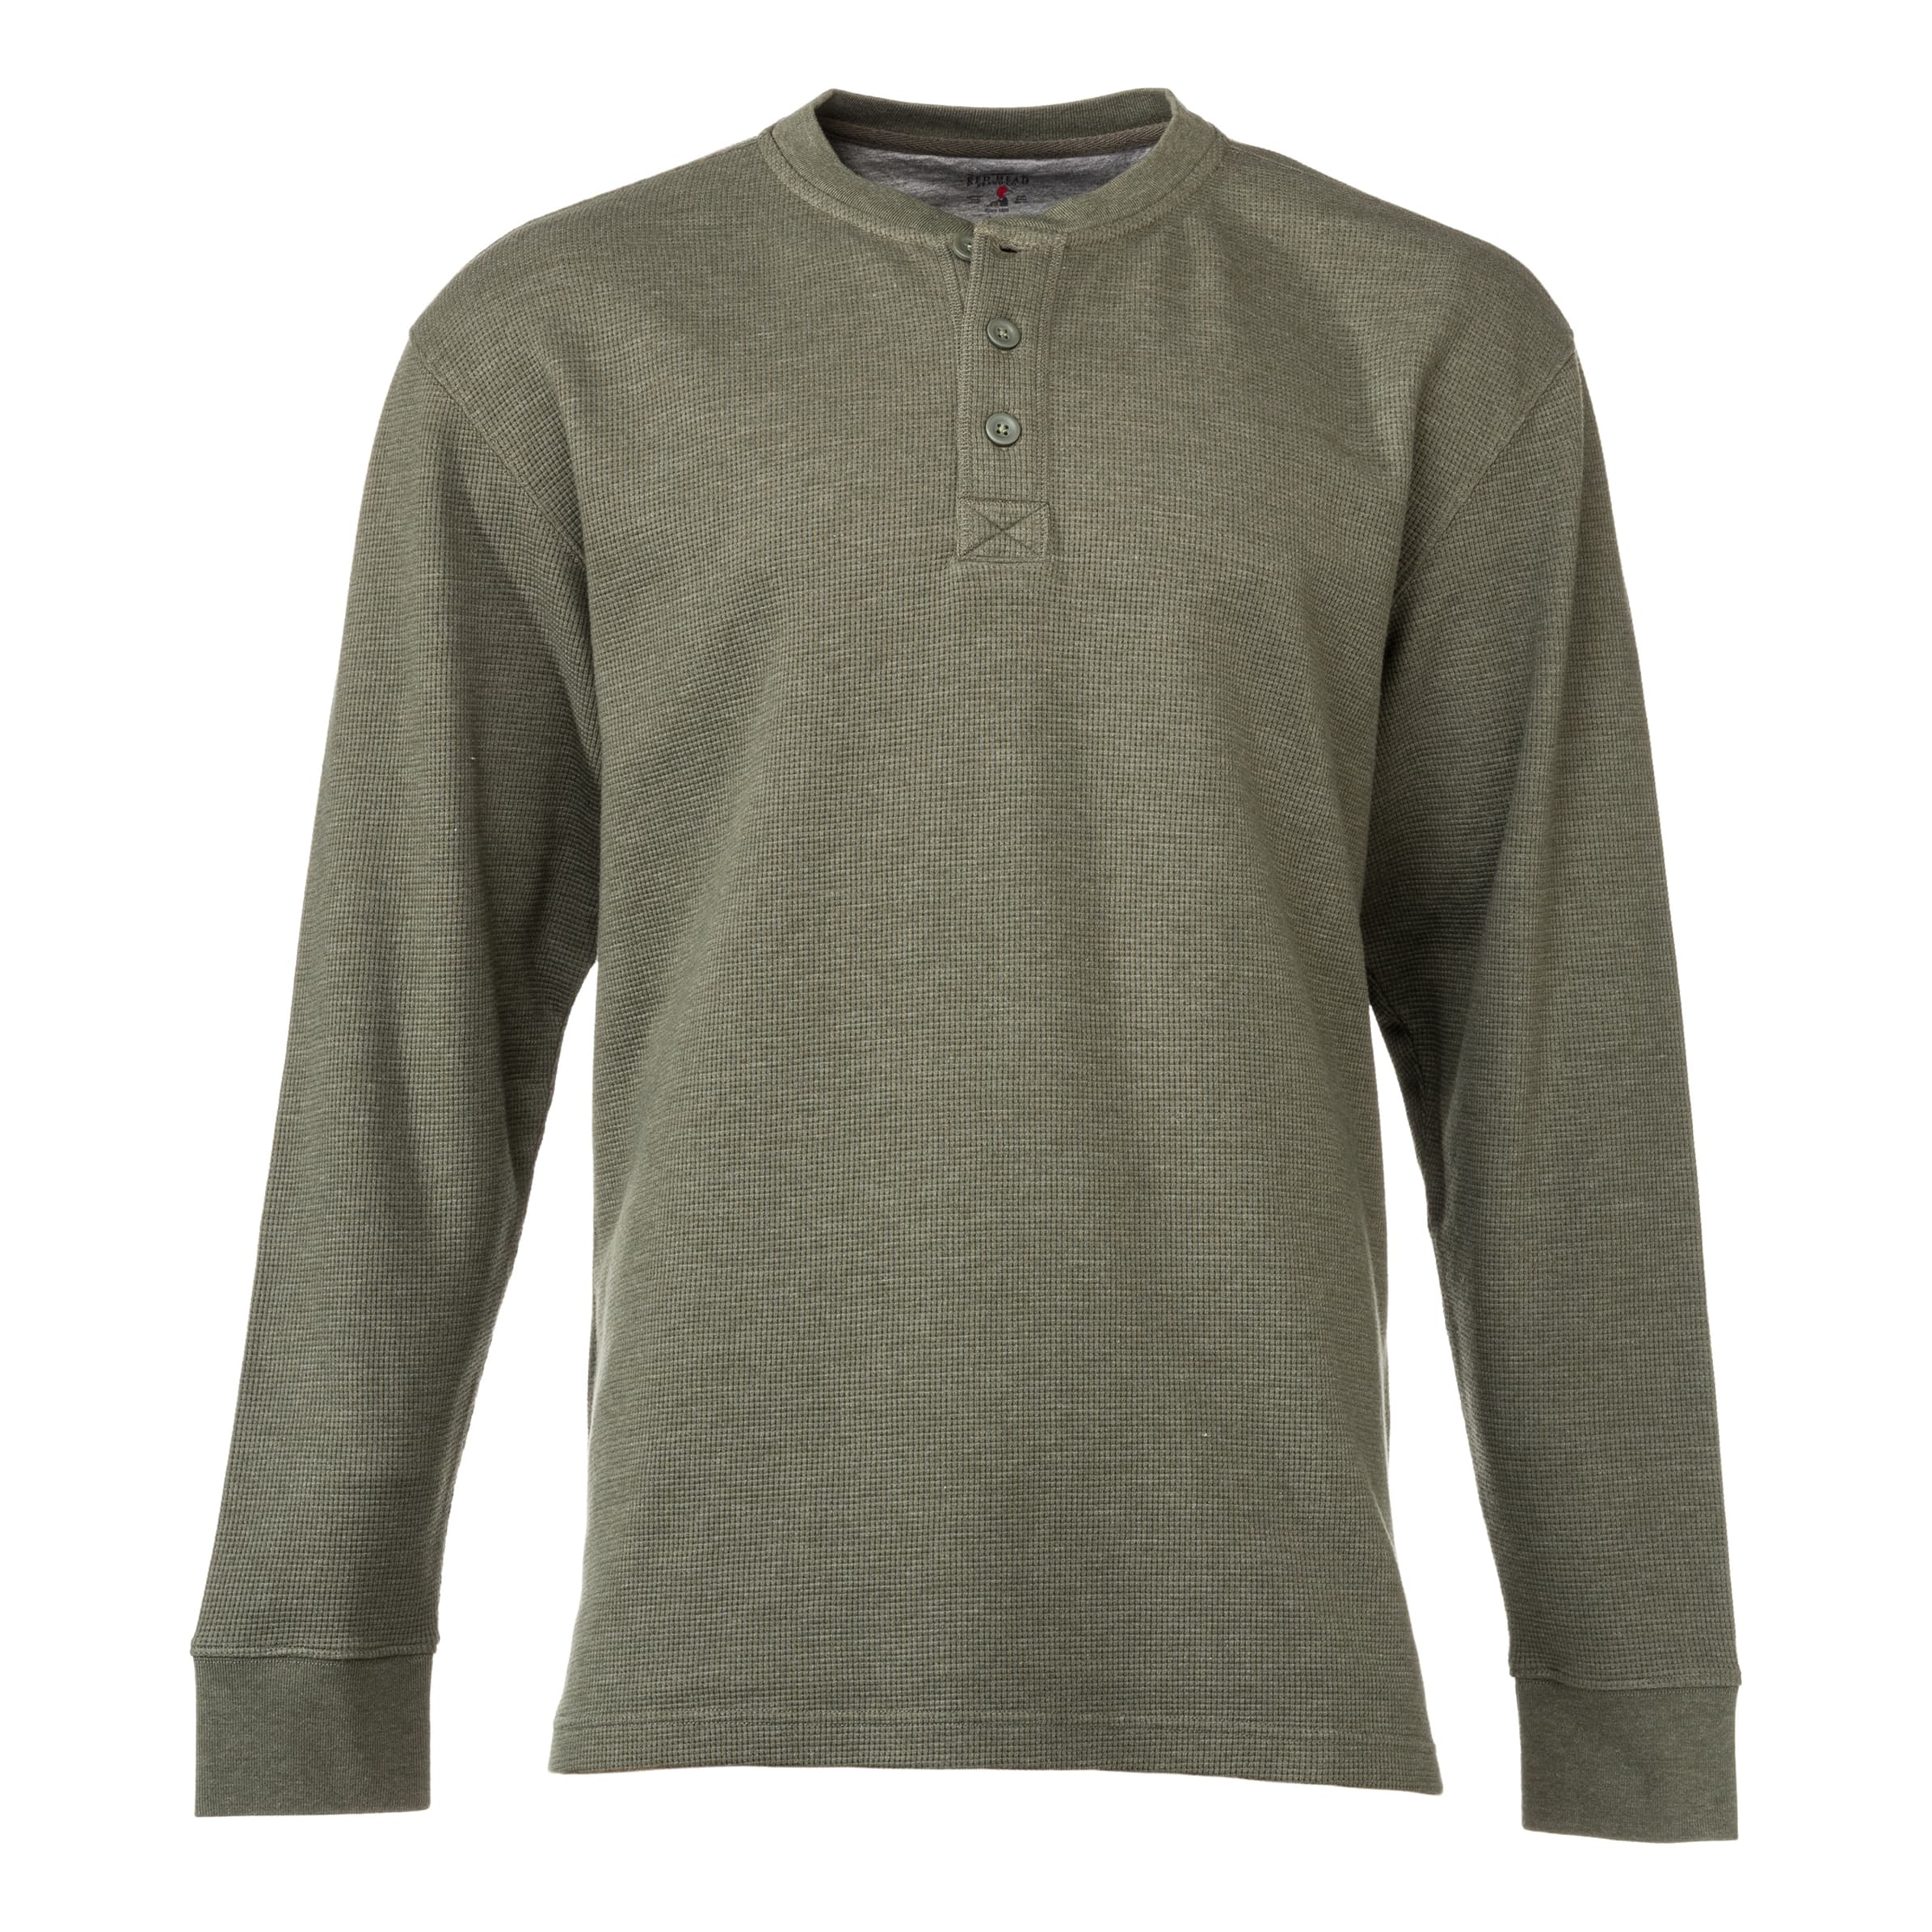 RedHead Men’s Thermal Henley Shirt - Olive Heather